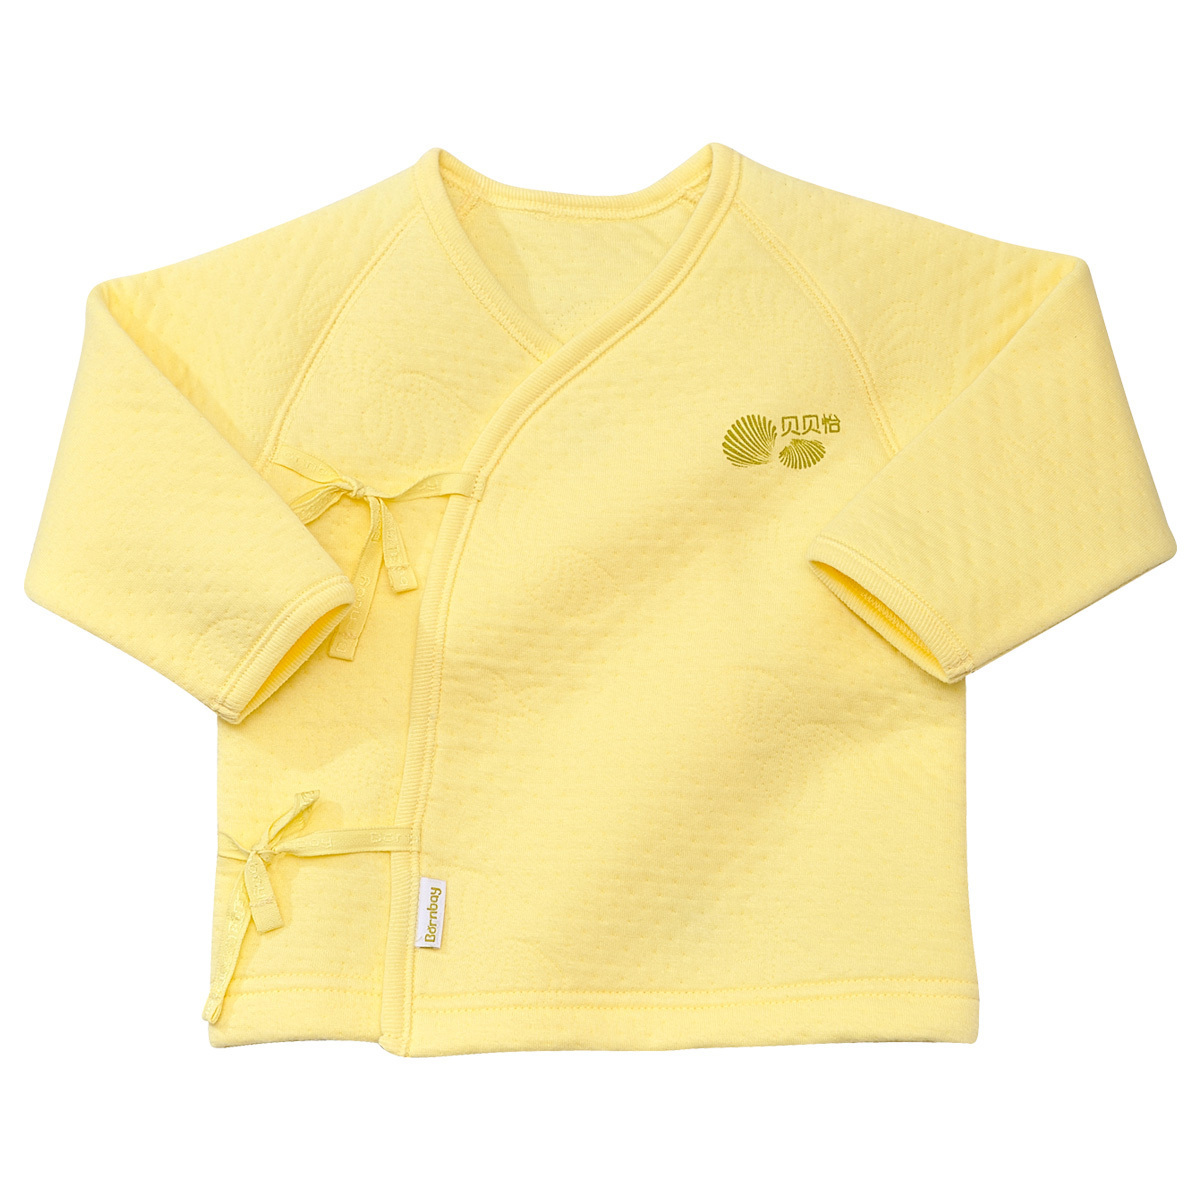 Baby thermal underwear baby clothes